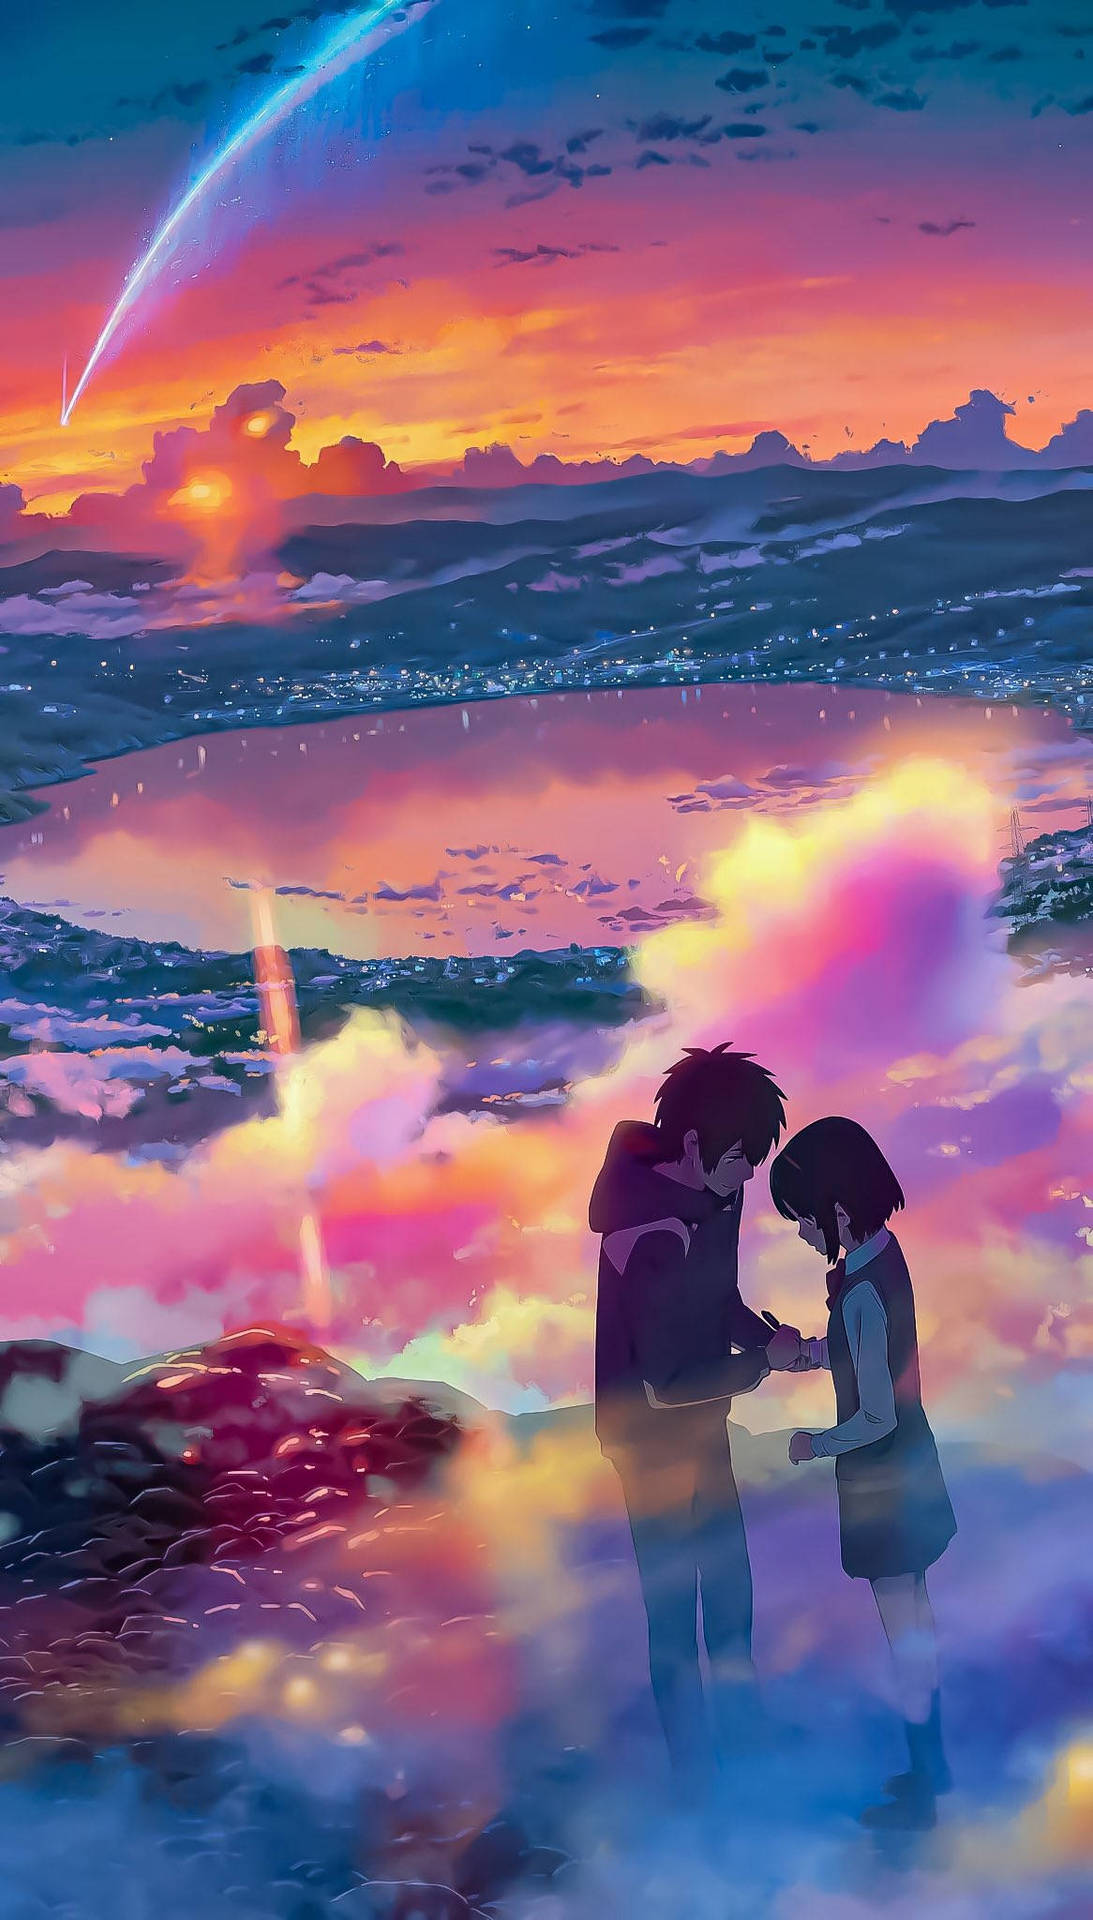 Your Name Anime Aesthetic Sunset Background